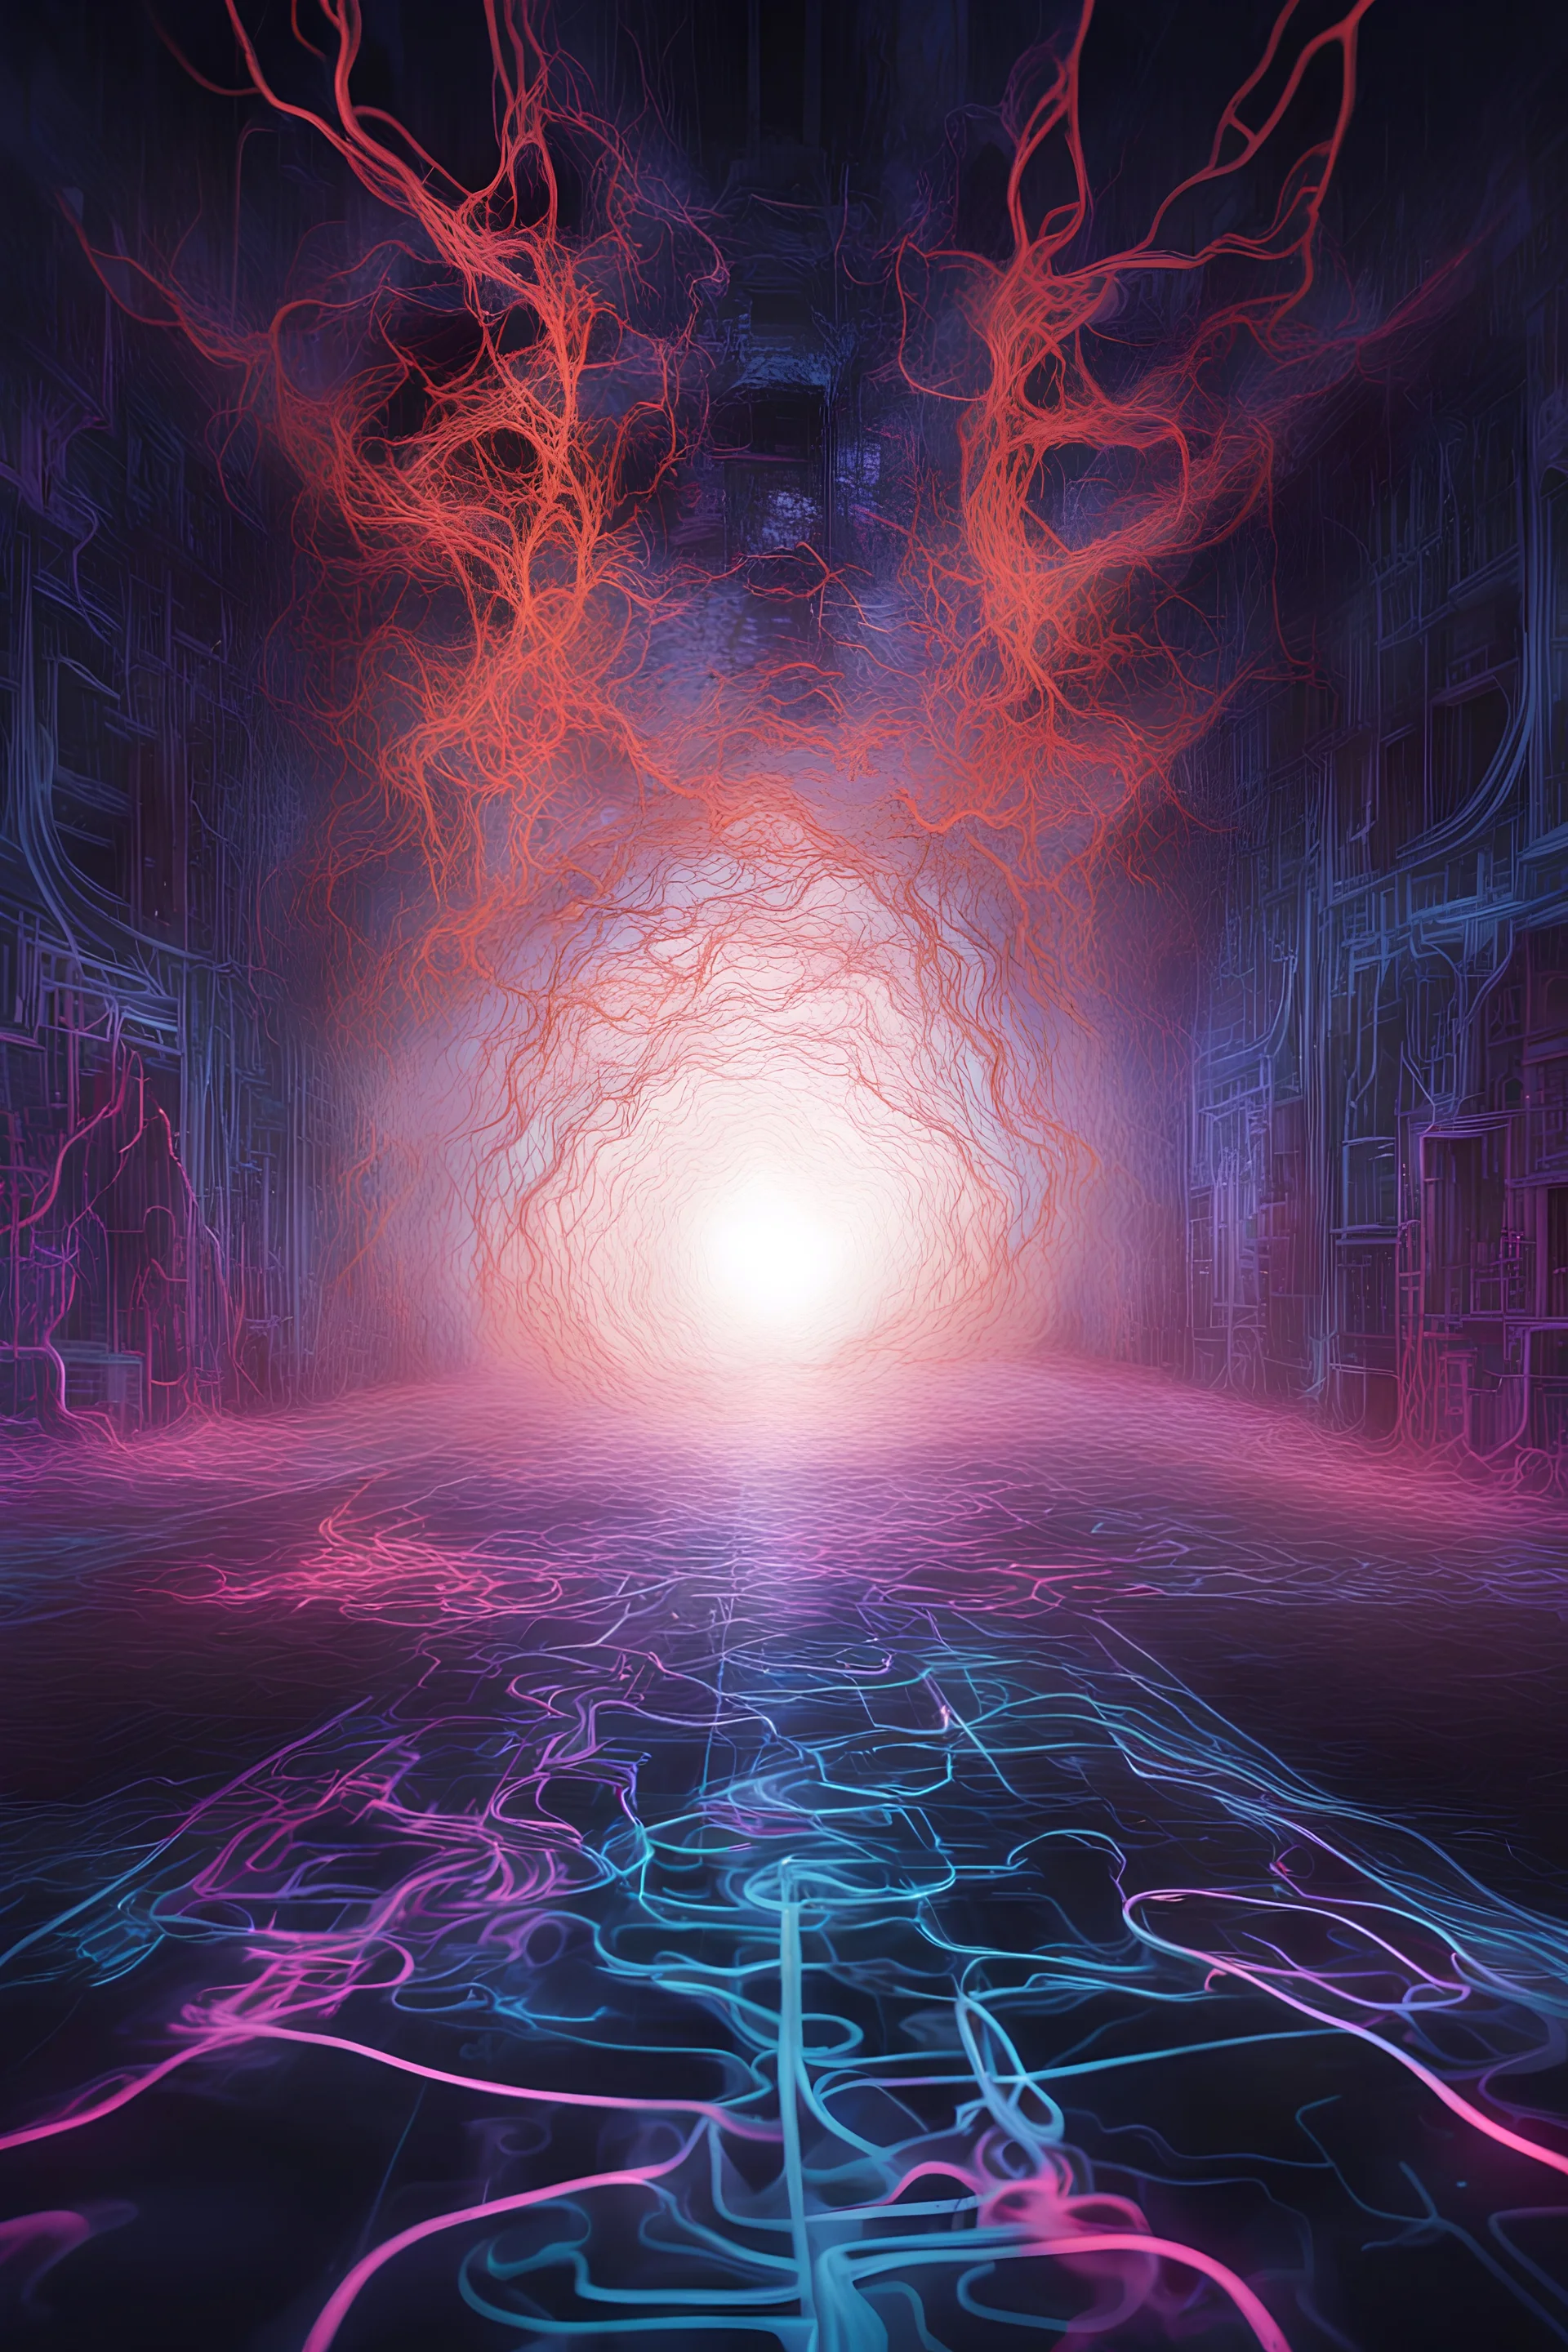 "Synaptic Shadowscape" Depict a shadowscape intertwined with synapses, where beats and glitches cast distorted shadows. Incorporate cyber sigils that dance along the neural pathways, creating an immersive and mind-bending experience.